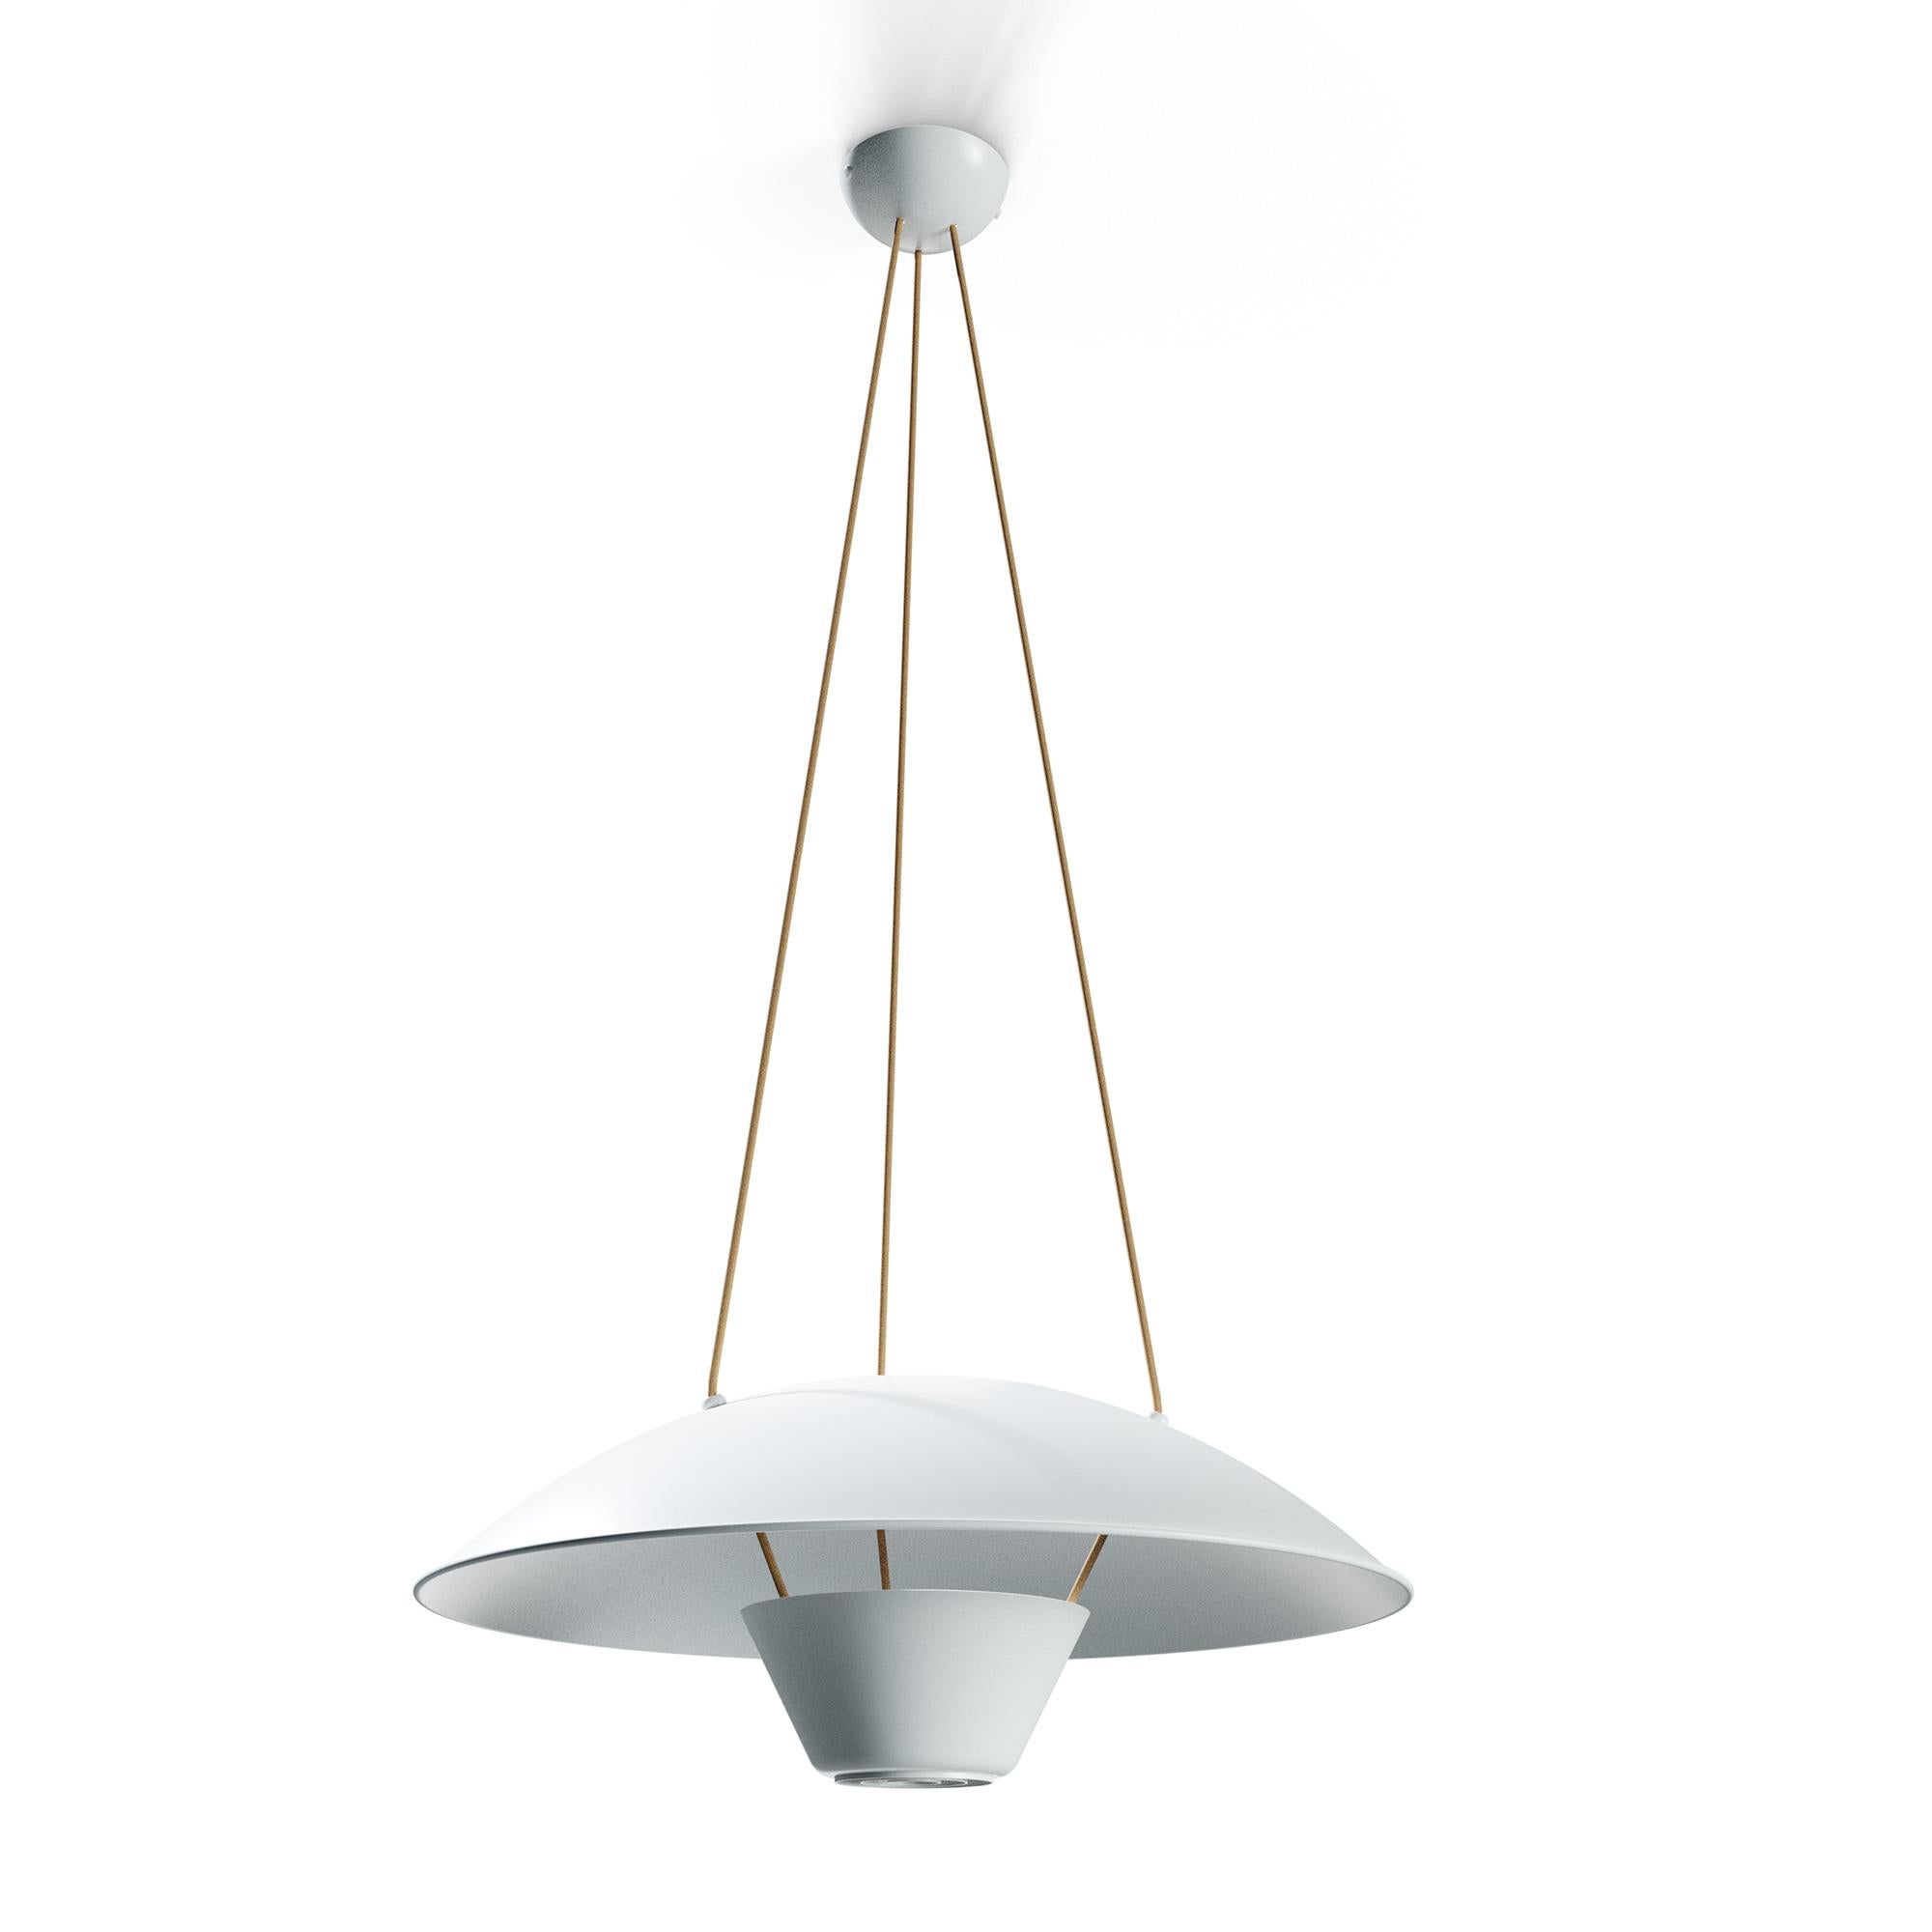 Michel Mortier M4 suspension lamp in white for Disderot. Originally designed in 1952, this sculptural lamp is a newly produced numbered edition with authentication certificate made in France by Disderot with many of the same small-scale